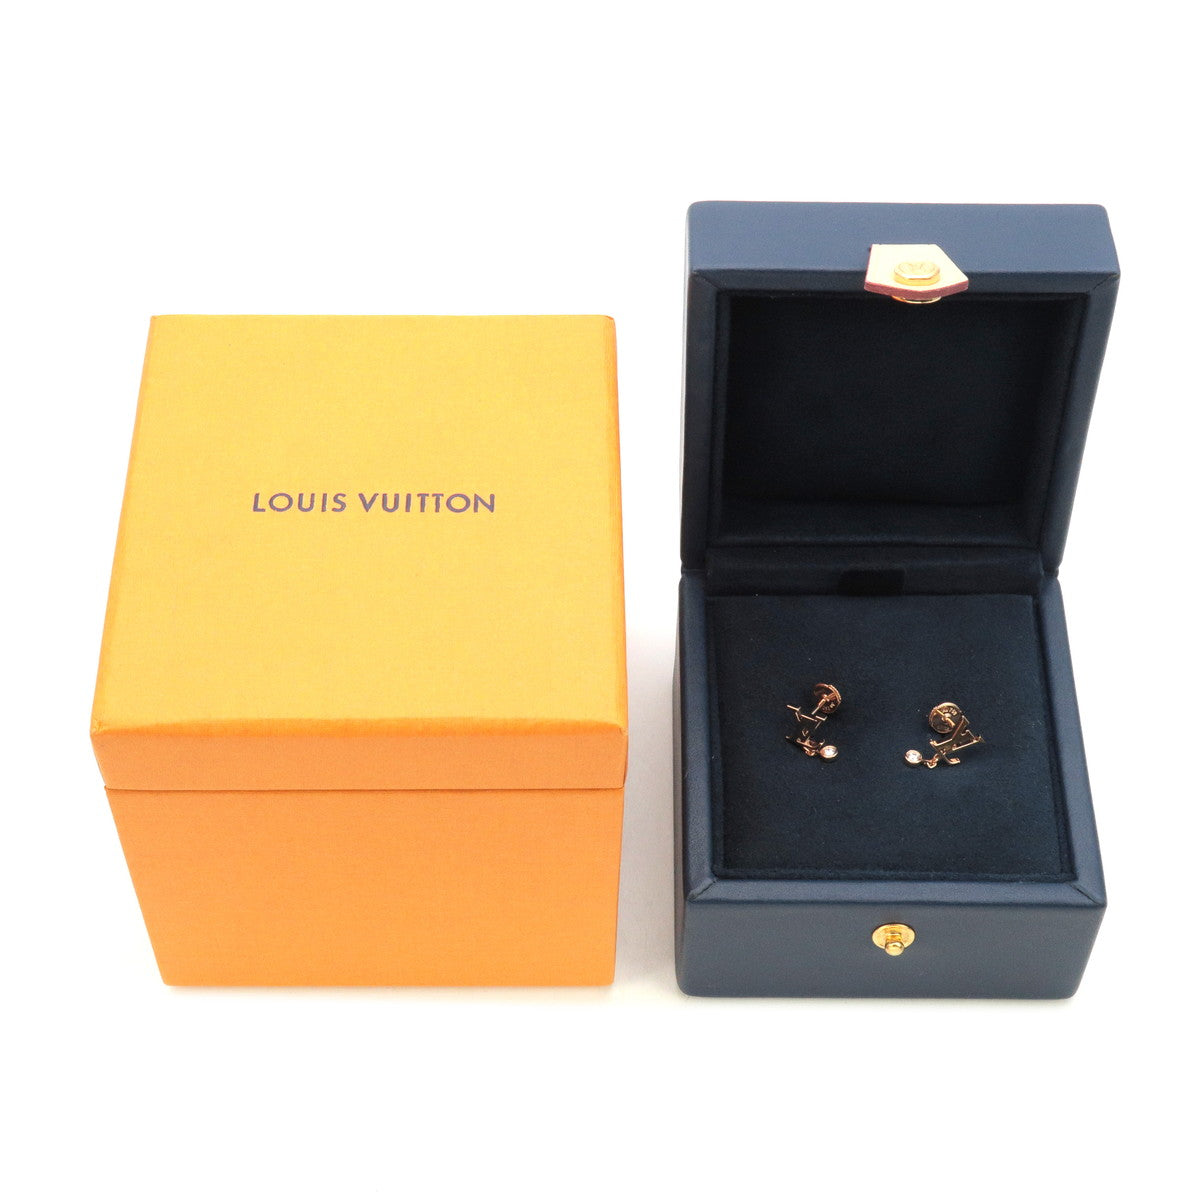 Sold at Auction: LOUIS VUITTON IDYLLE BLOSSOM LV EARRINGS